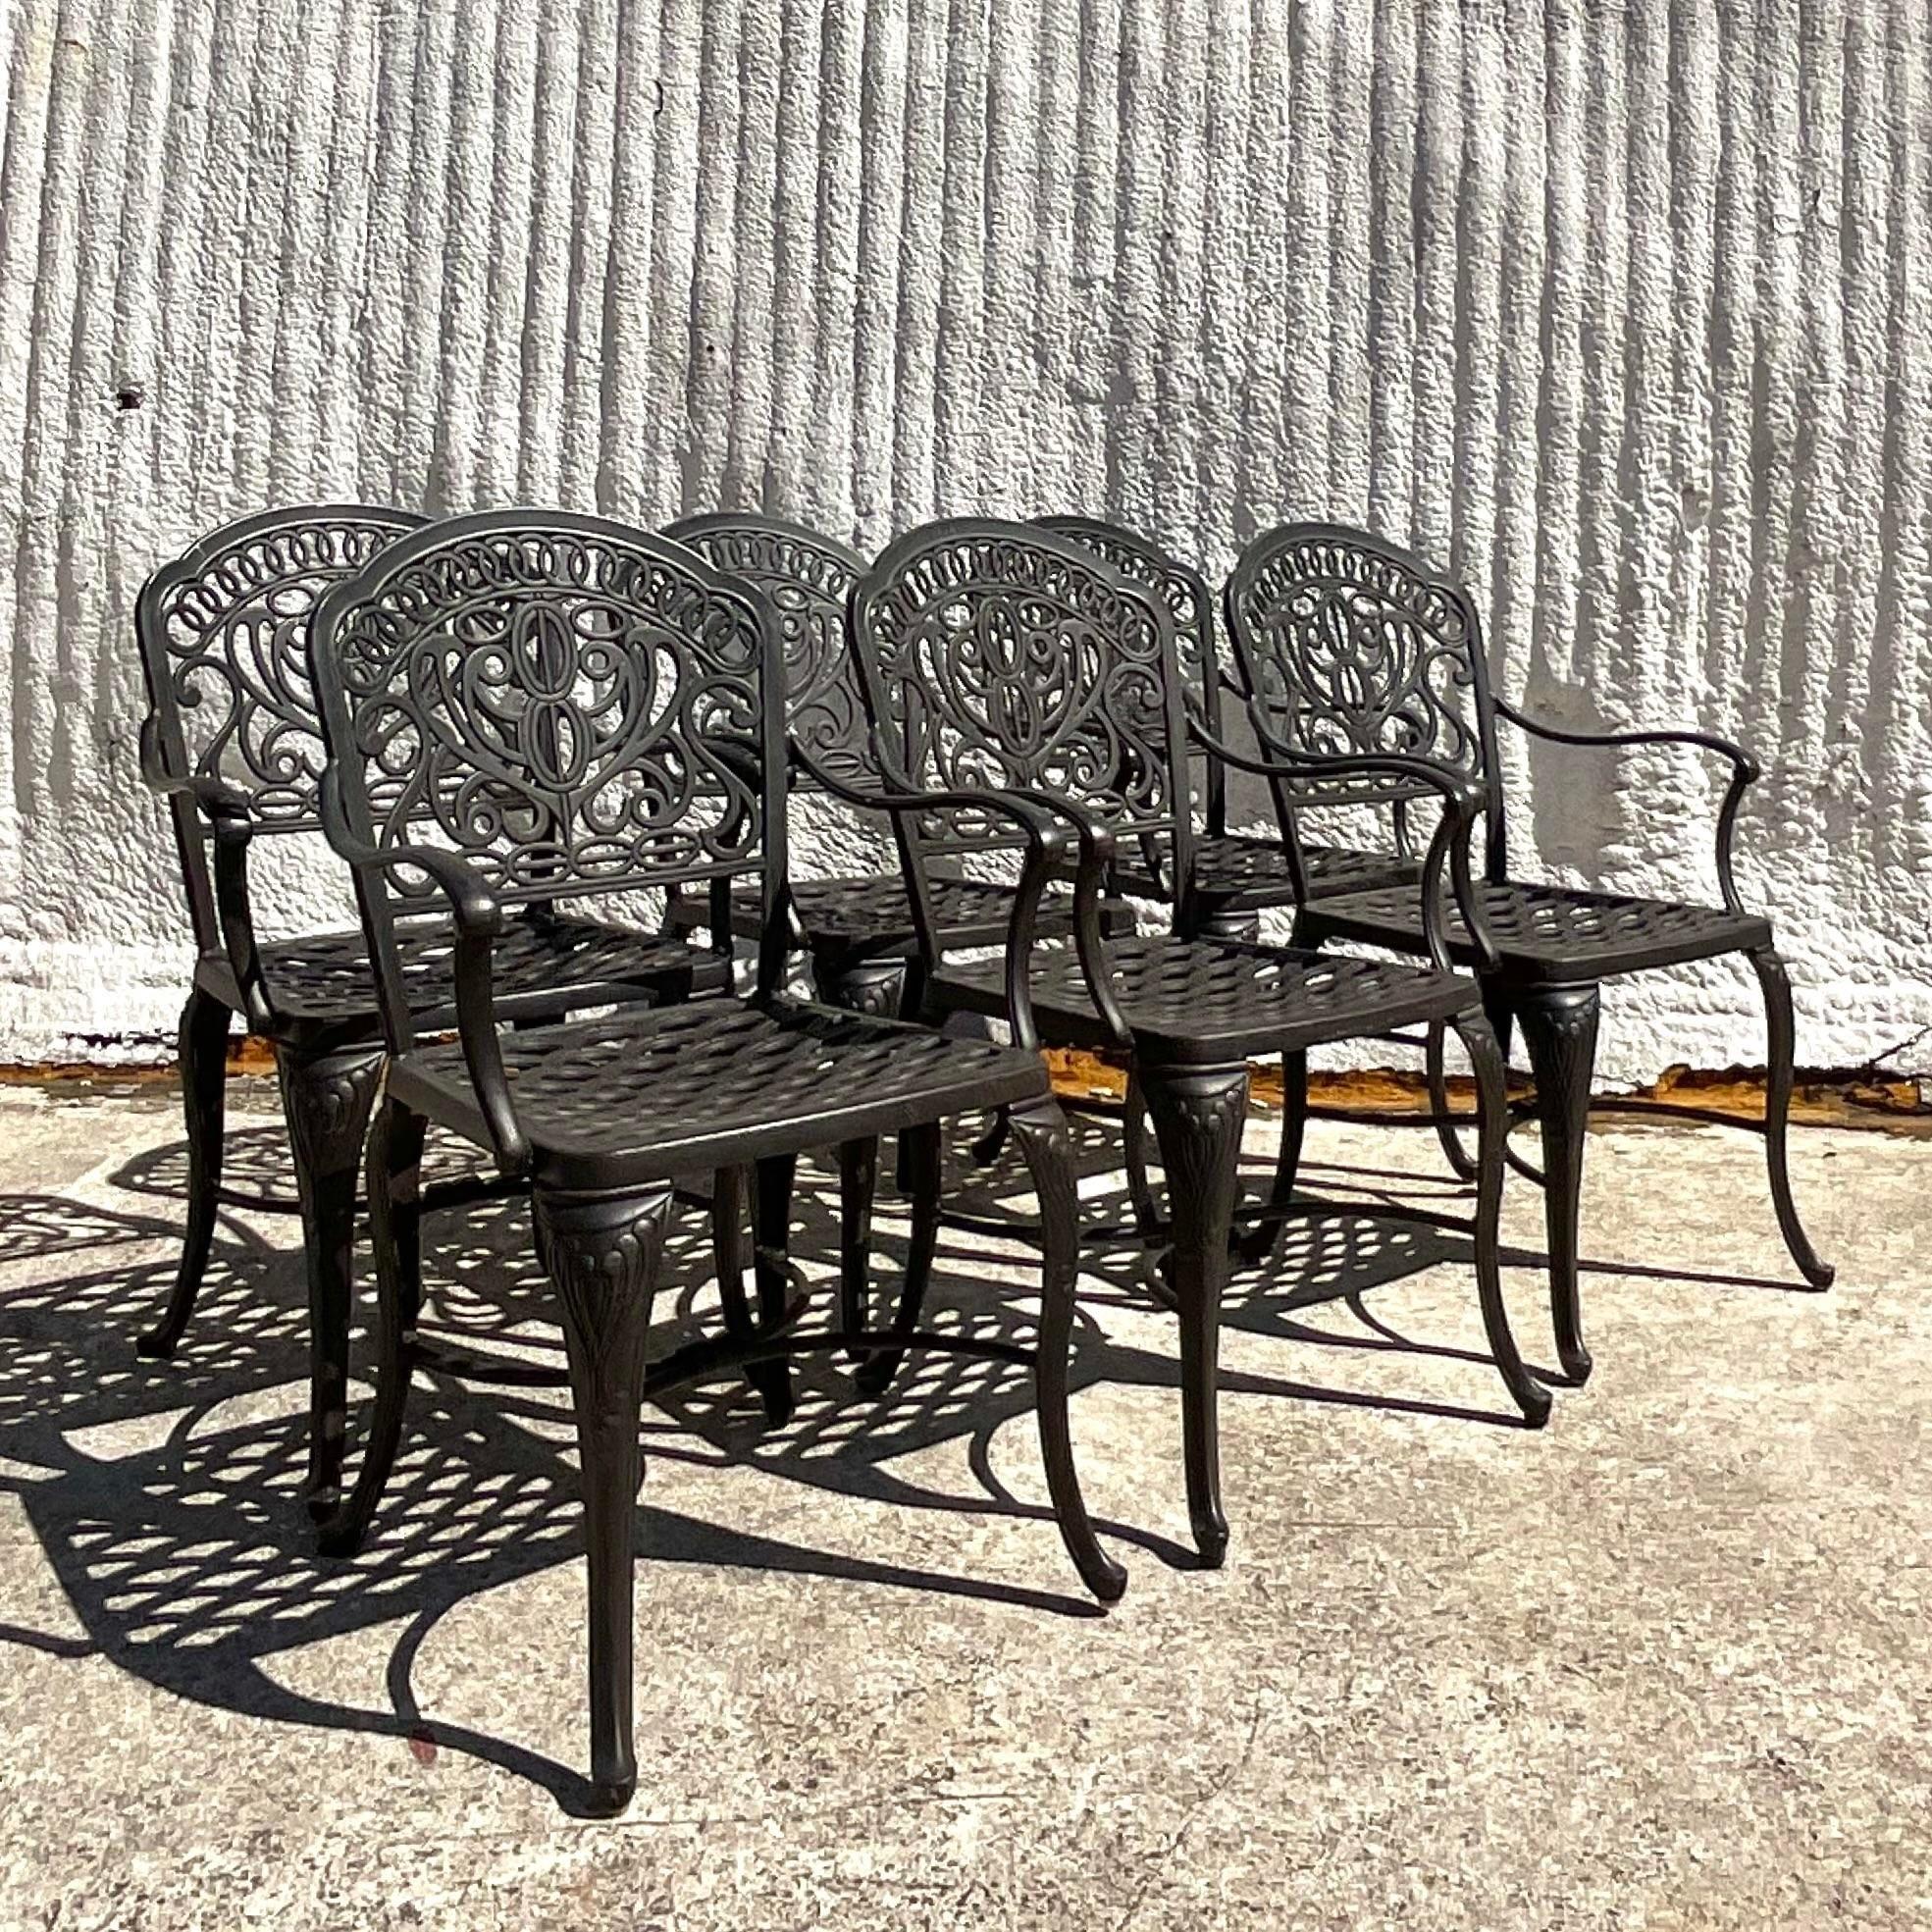 A fabulous set of six vintage Coastal outdoor dining chairs. Made by the iconic Hanamint group and tagged on the bottom. Chic cast aluminum frame in a fabulous loop design. Coordinating oval dining table also available on my page. Acquired from a